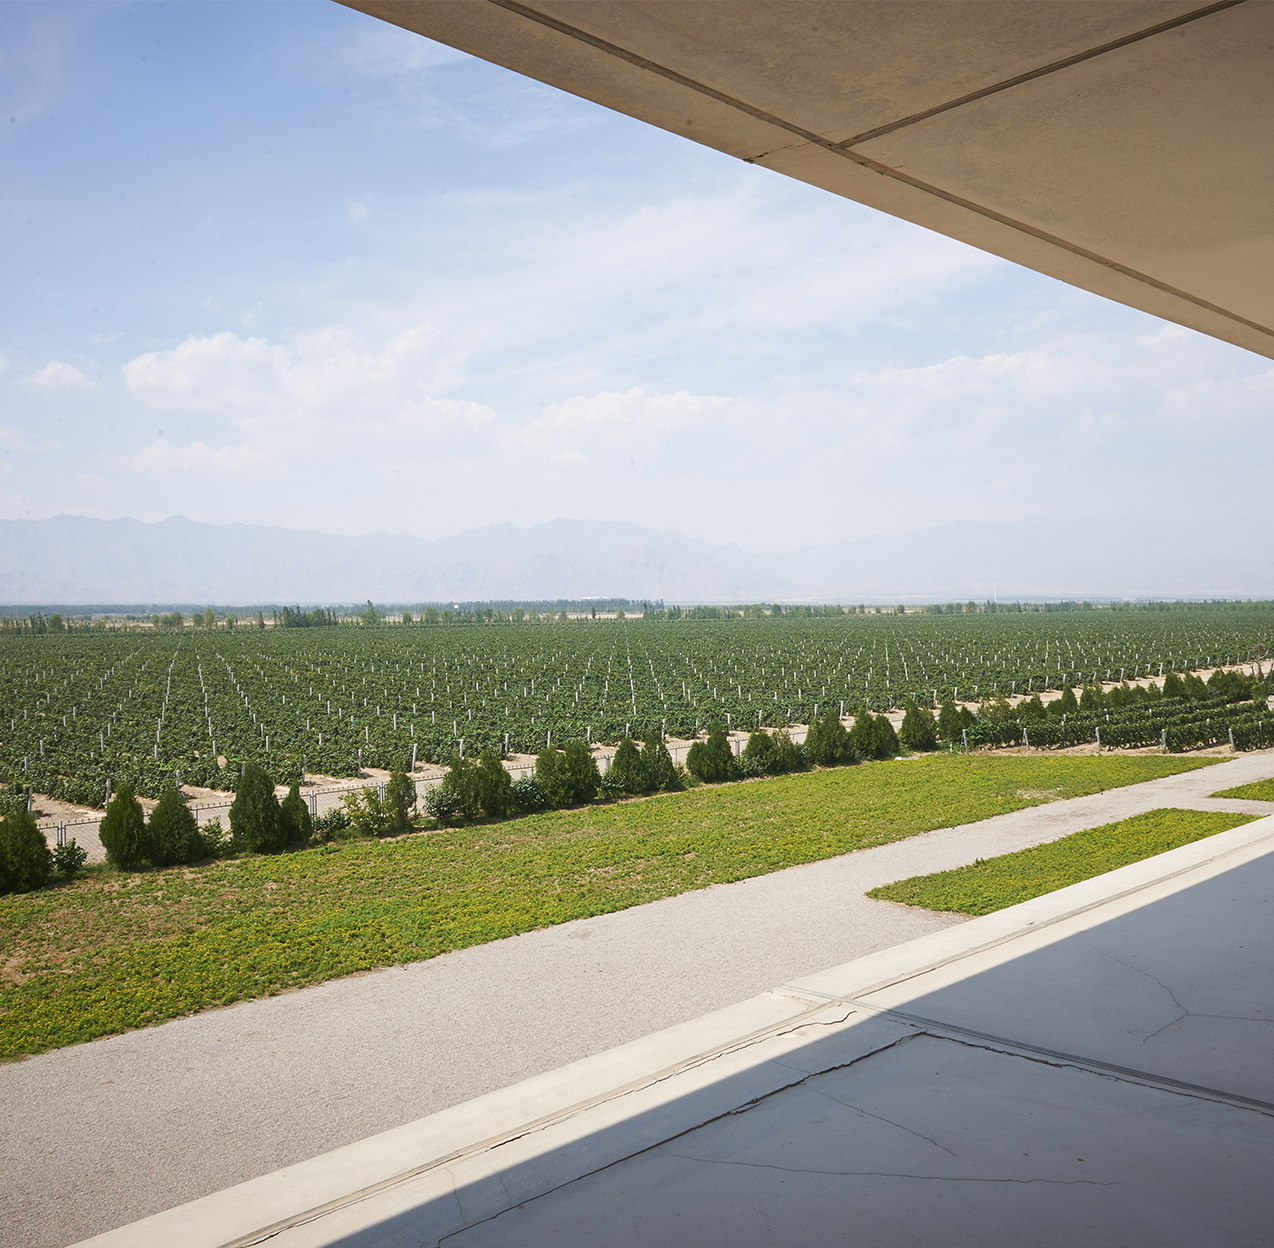 Domaine Chandon: Targeting a niche market - Asian Wine & Spirits - The Silk  Route